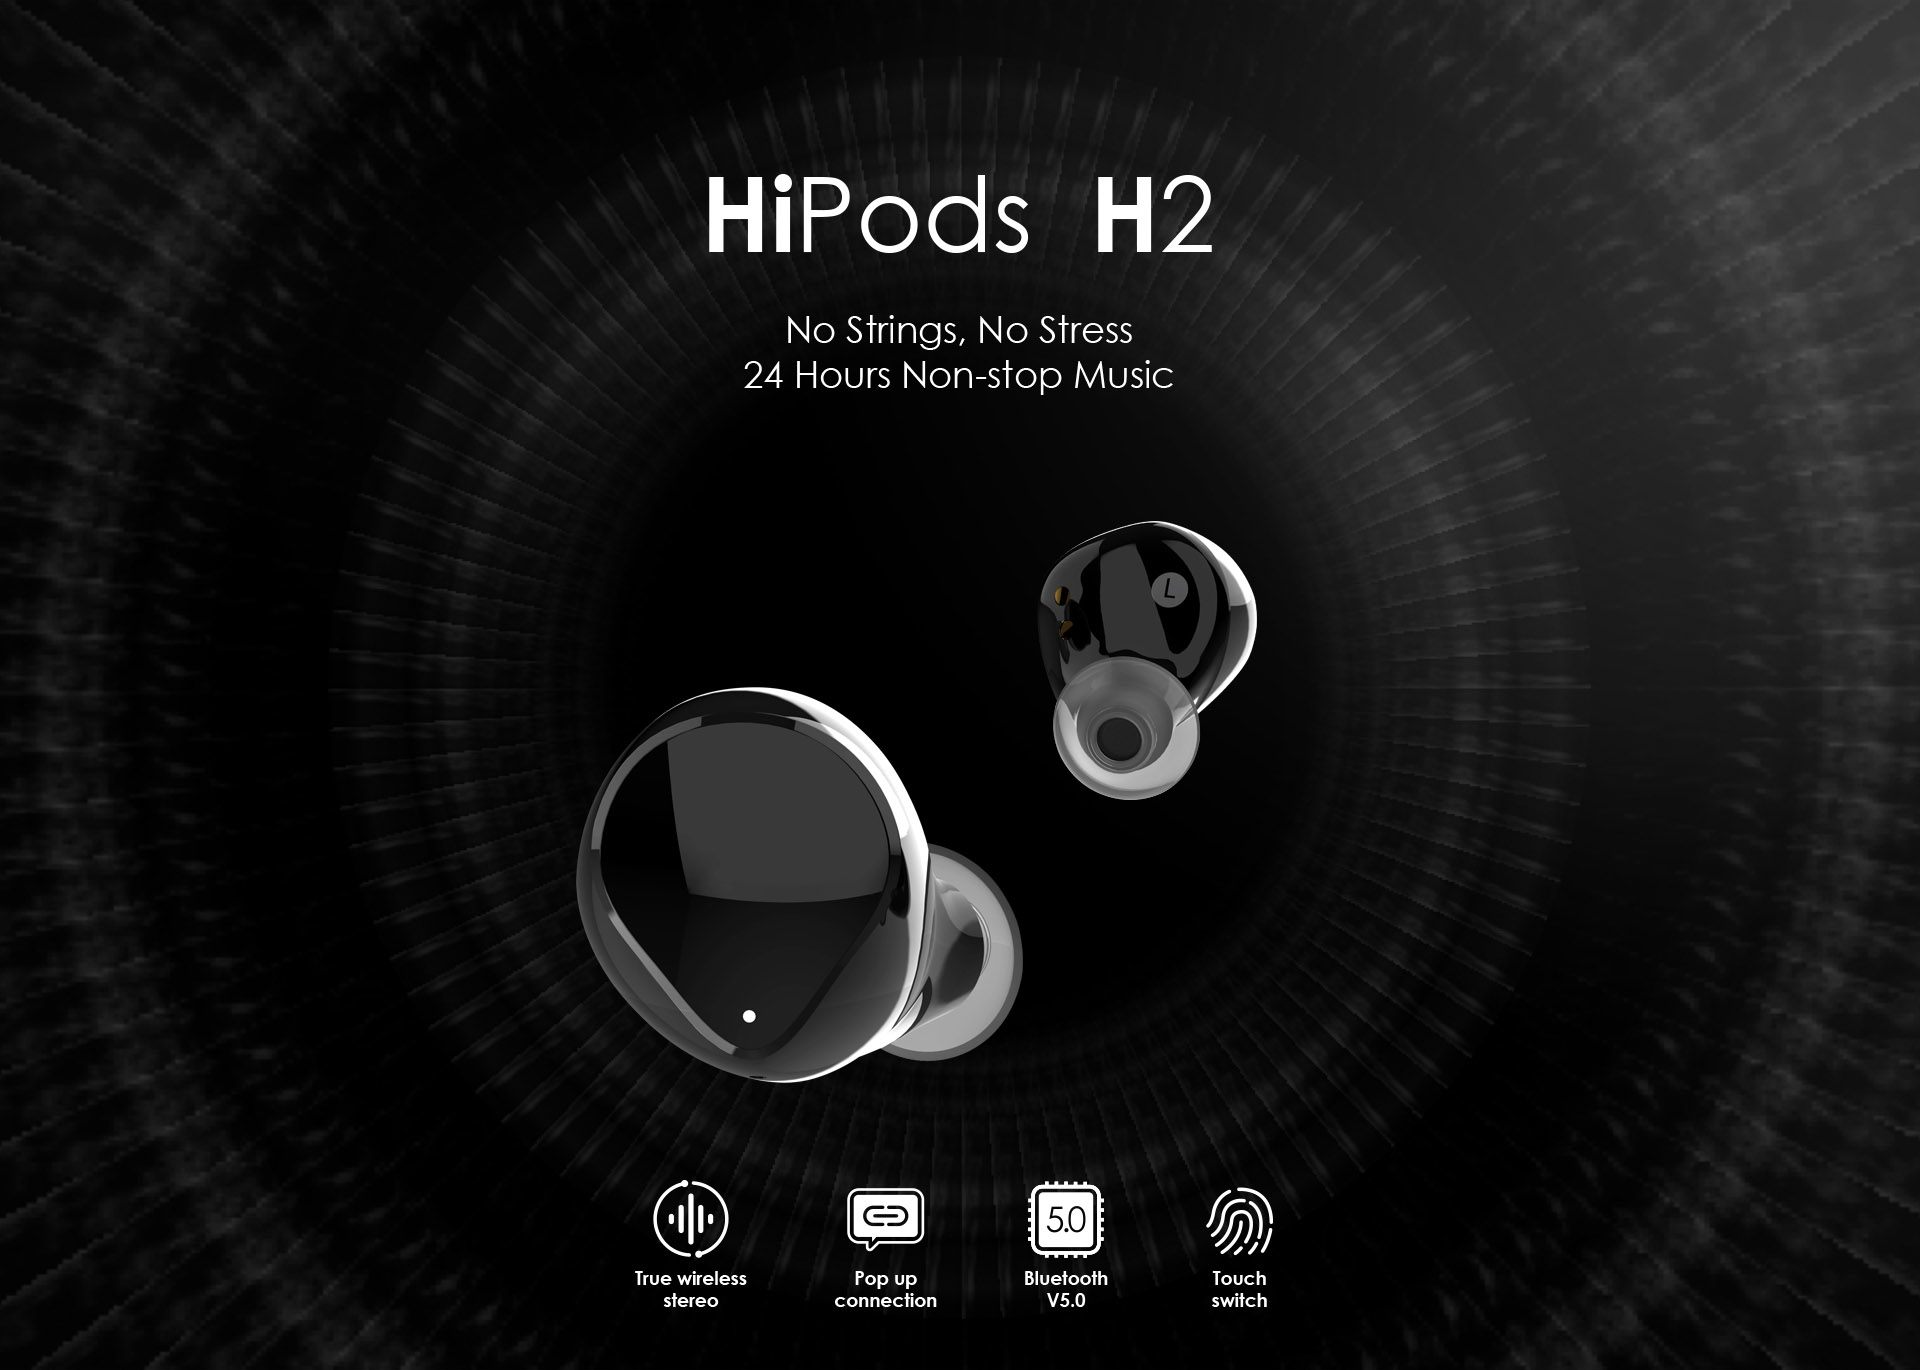 TECNO's first True Wireless Earbuds launched - HiPods H2